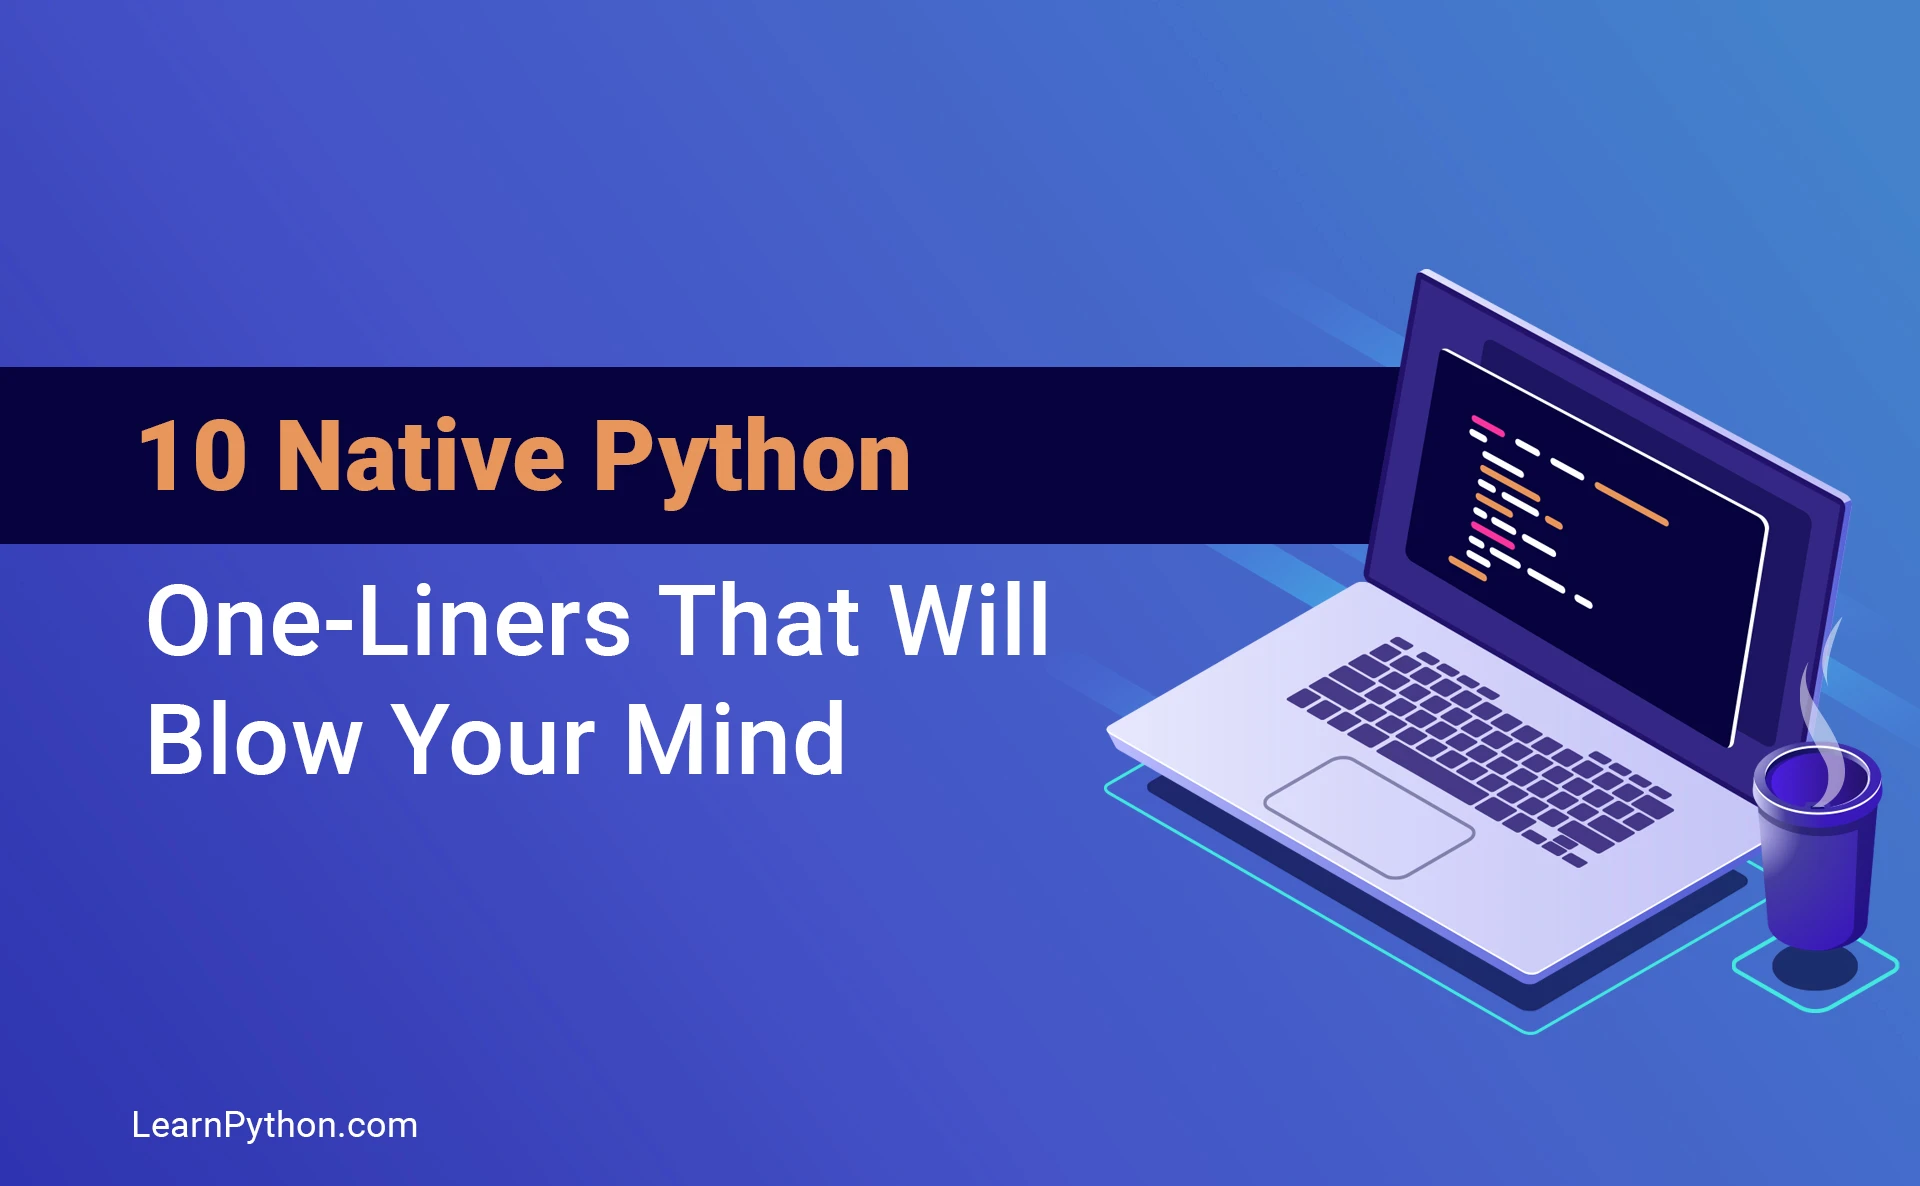 10 Native Python One-Liners That Will Blow Your Mind